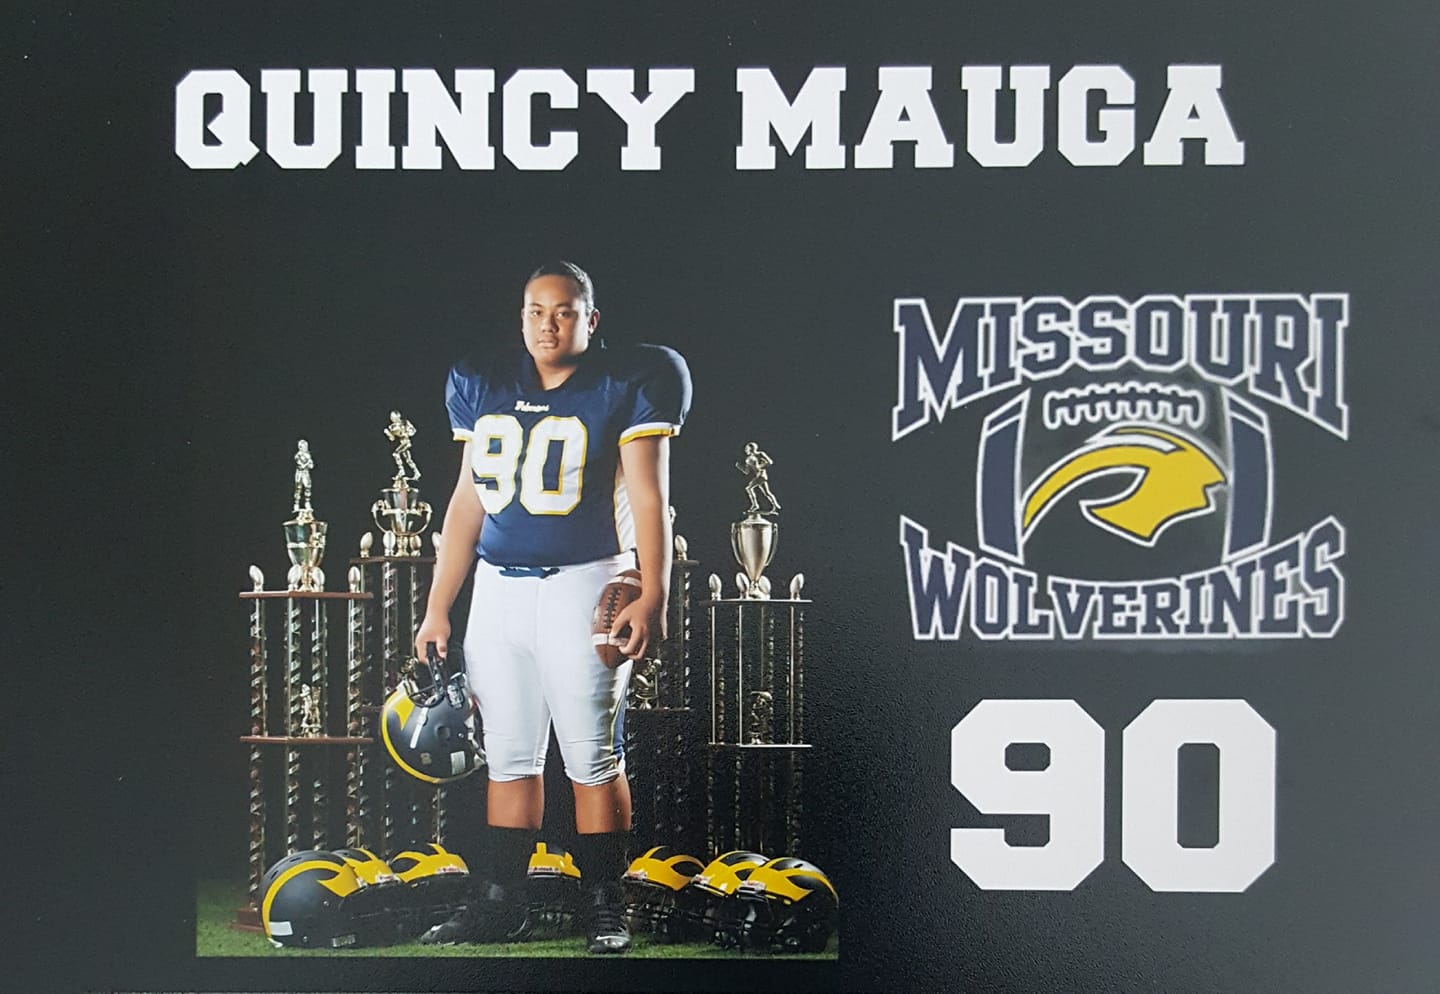 Class of 2024 of Park Hill High School Quincy Mauga former player for the Missouri Wolverines Youth Football Club in Kansas City Missouri